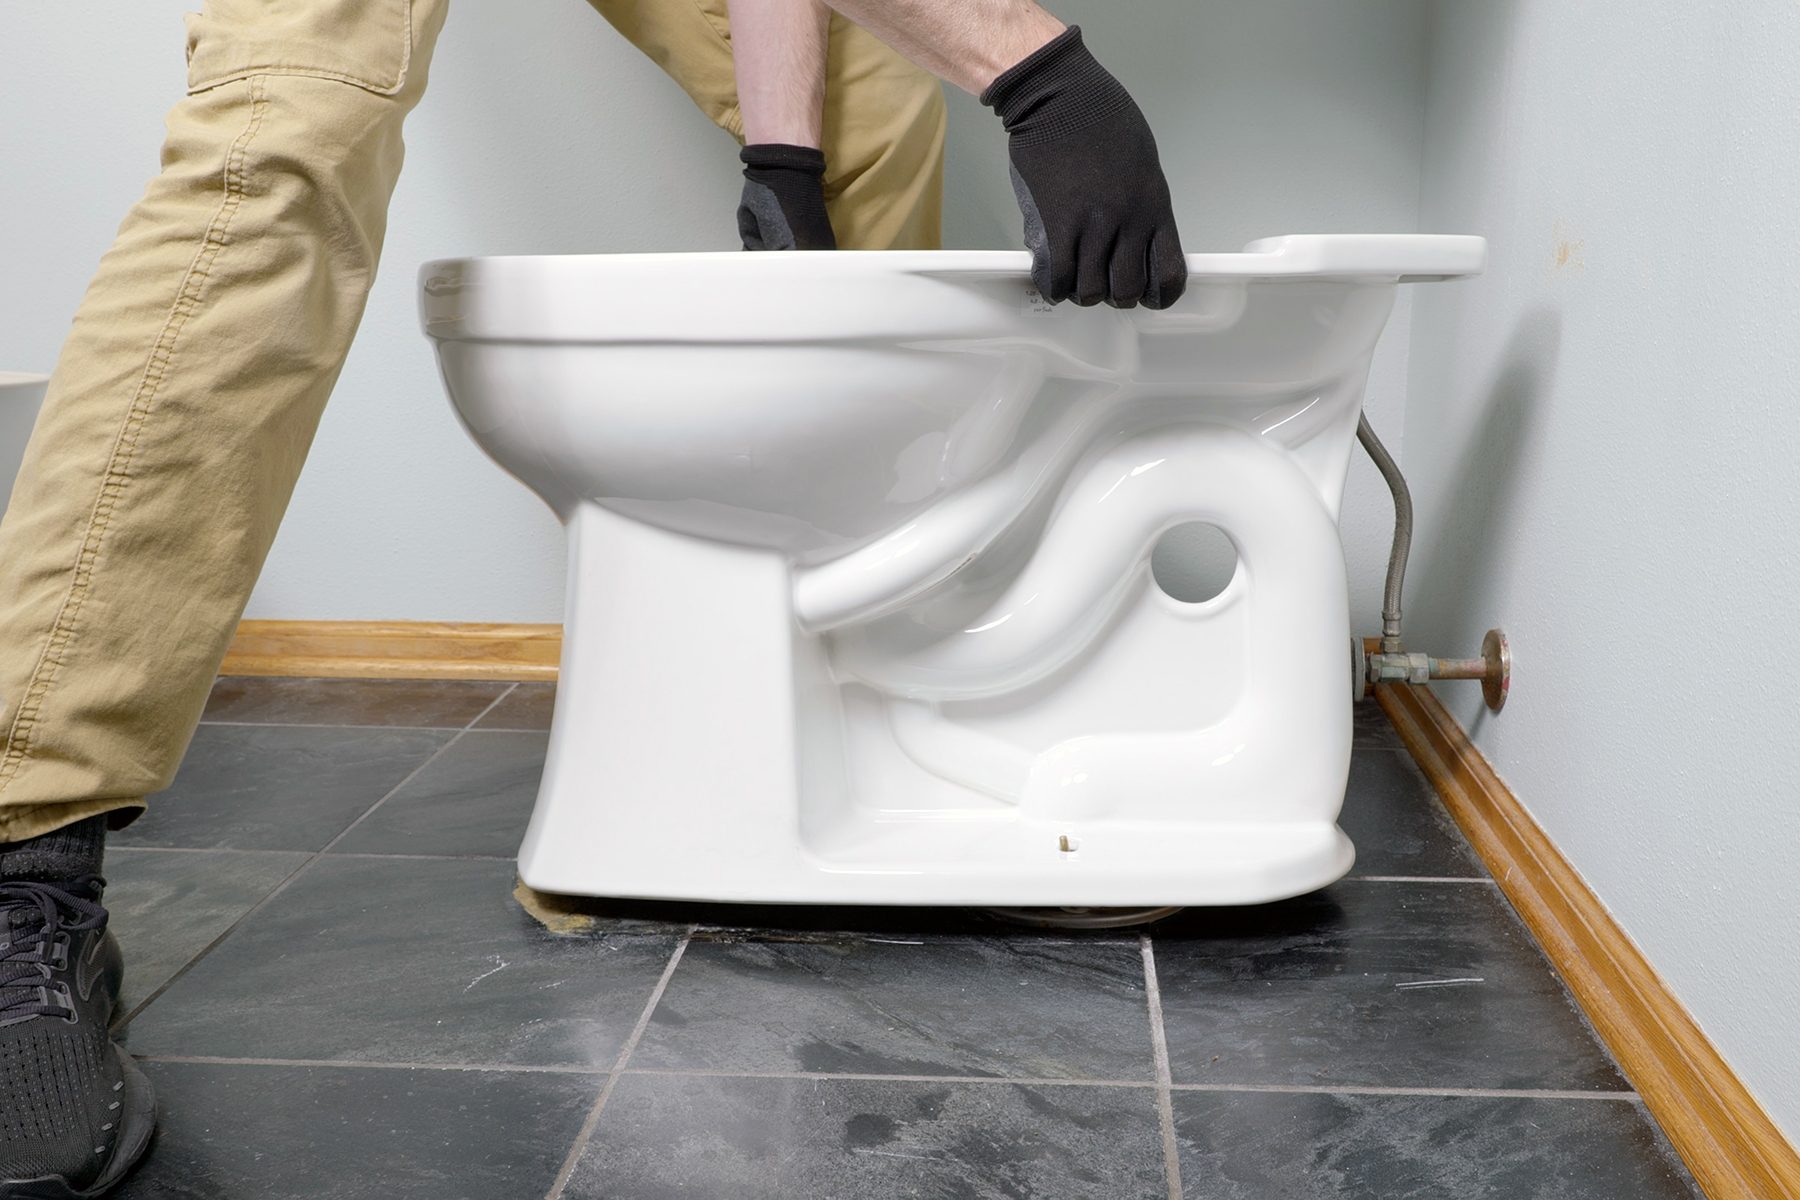 How To Replace A Toilet Fhmvs23 Mf 12 04 Replacetoilet 8